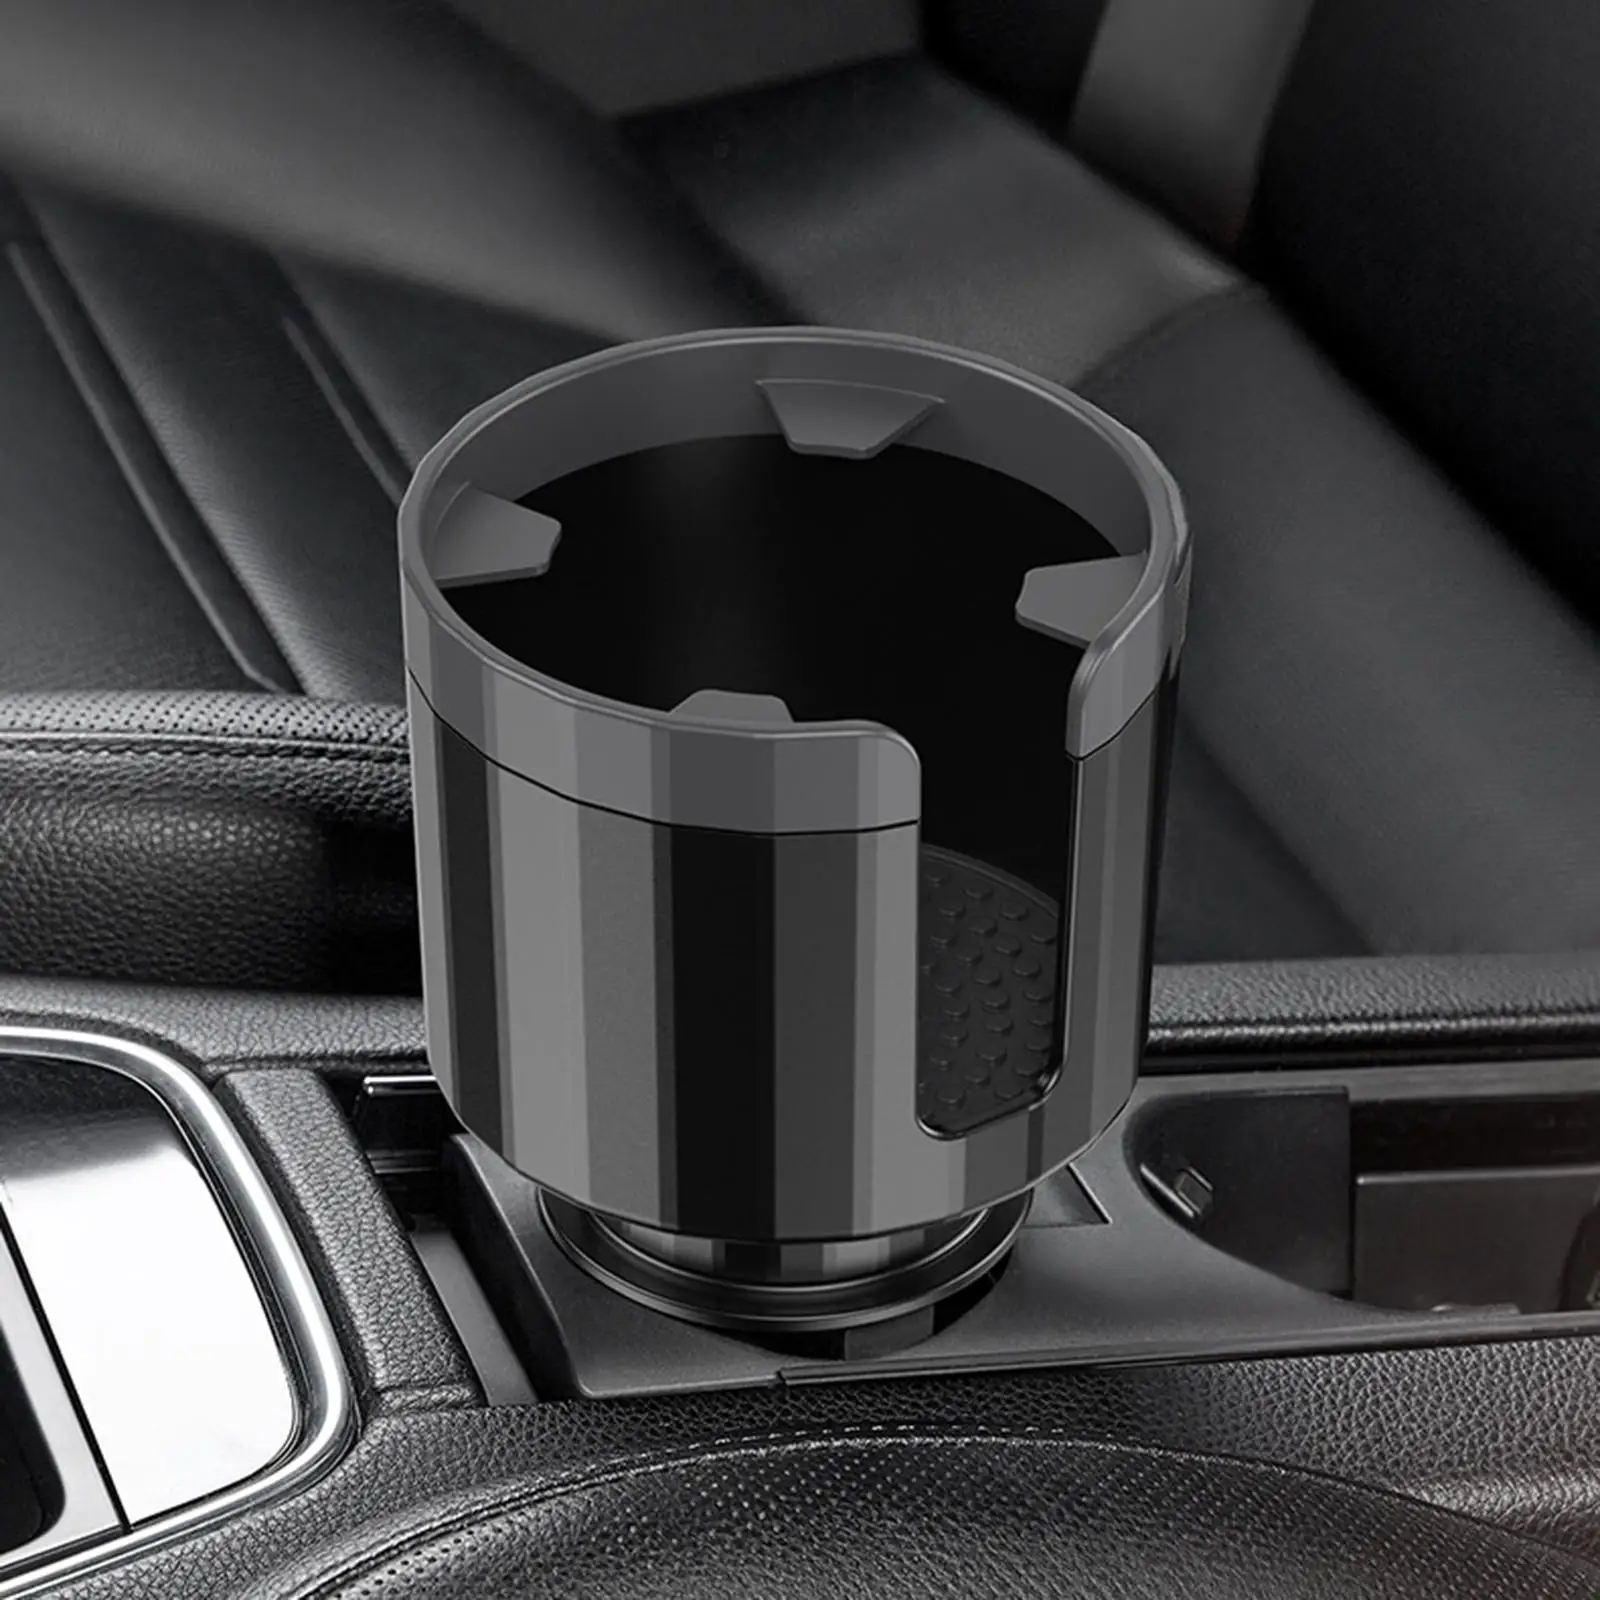 Car Cup Holder Expander Adapter with Adjustable Base Fit for Cups Drinks